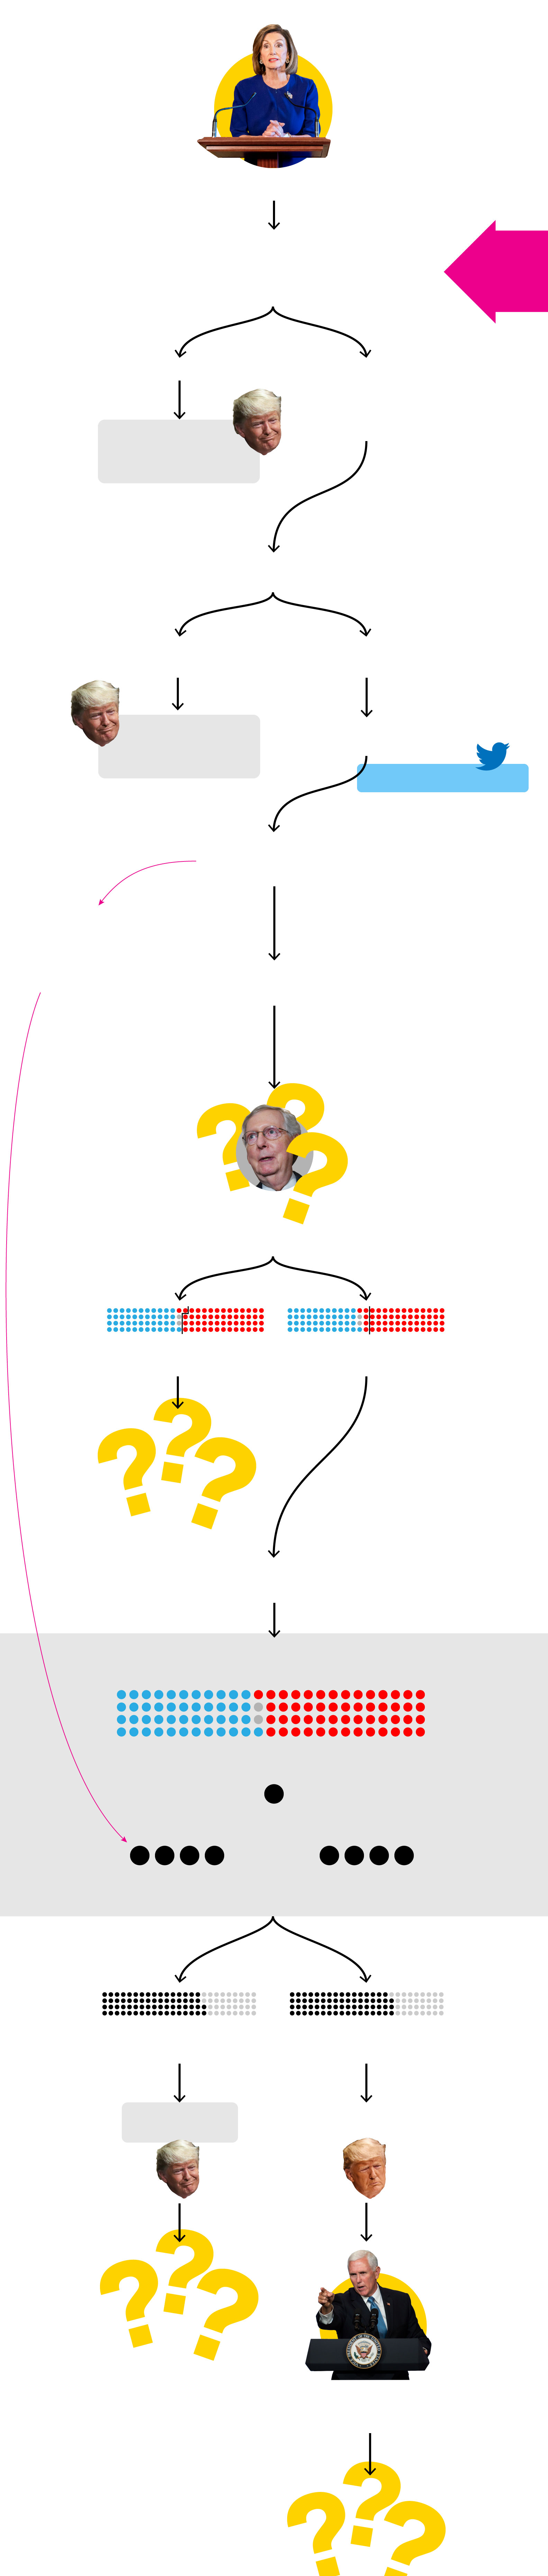 Confused By The Impeachment Process? This Flowchart Should Help.1584 x 7446